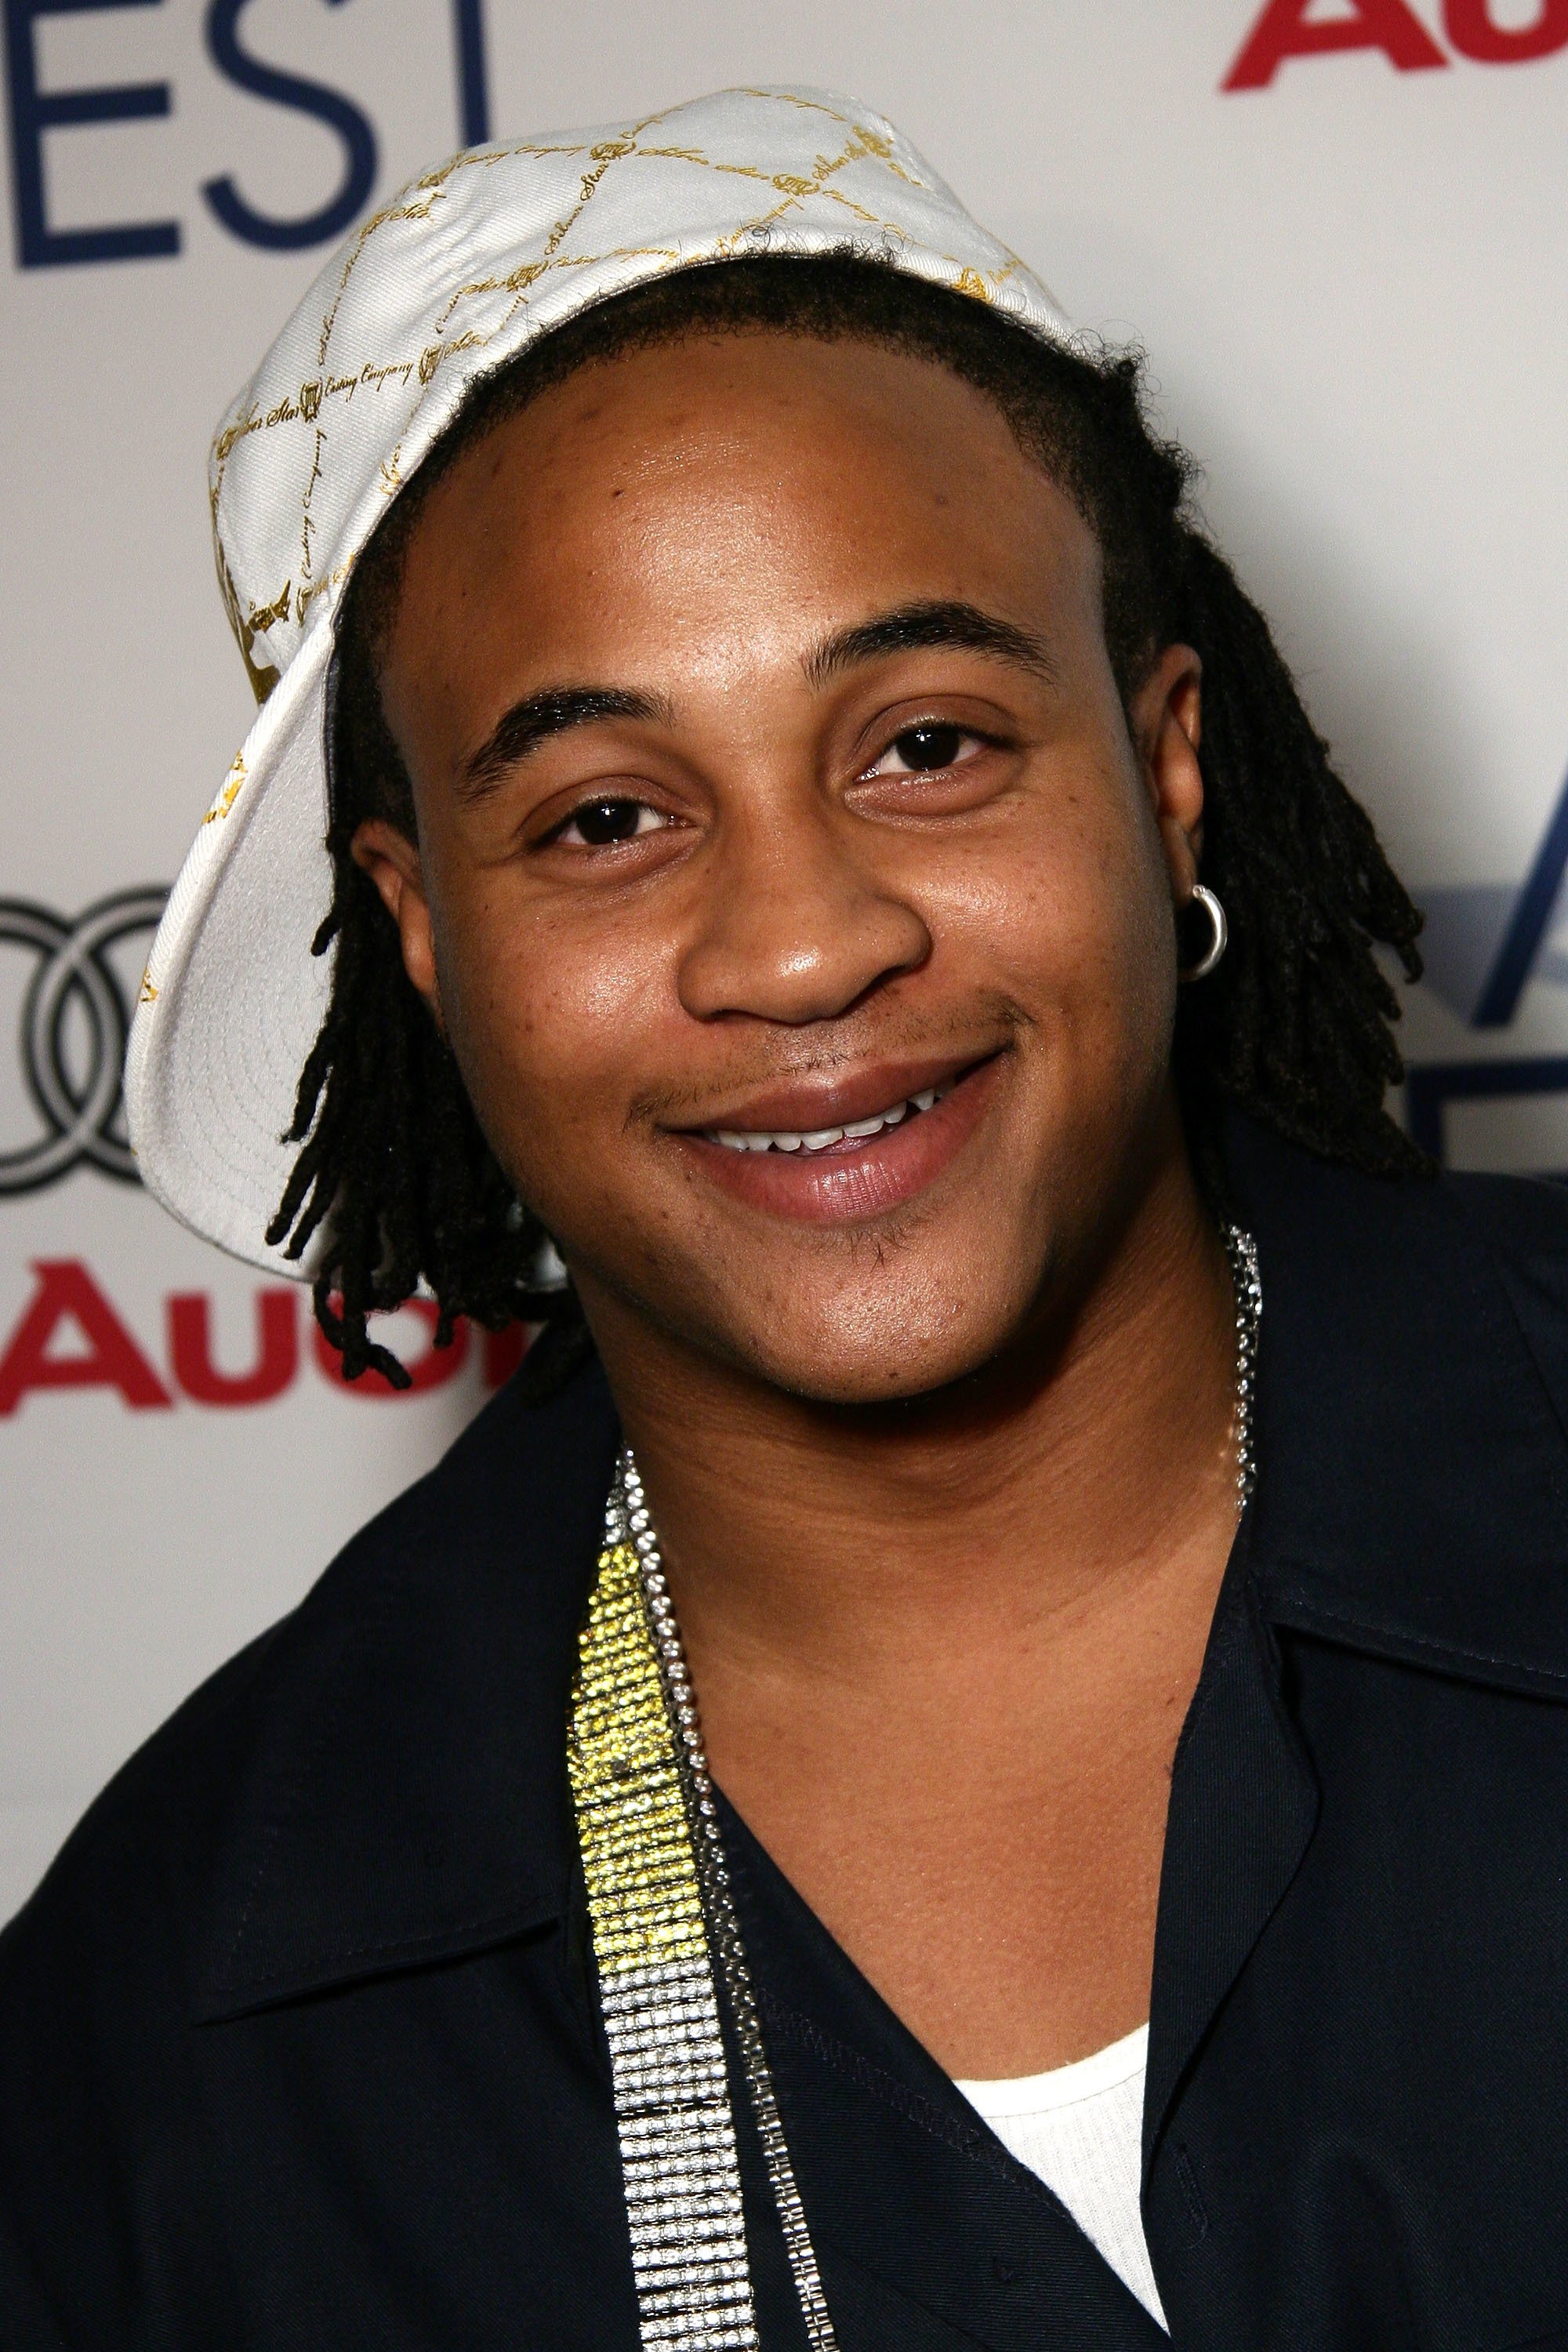 Orlando Brown arrives at the world premiere of "Public Enemy" during AFI FEST 2007 presented by Audi held at Arclight Cinemas on November 7, 2007 in Hollywood, California. | Source: Getty Images